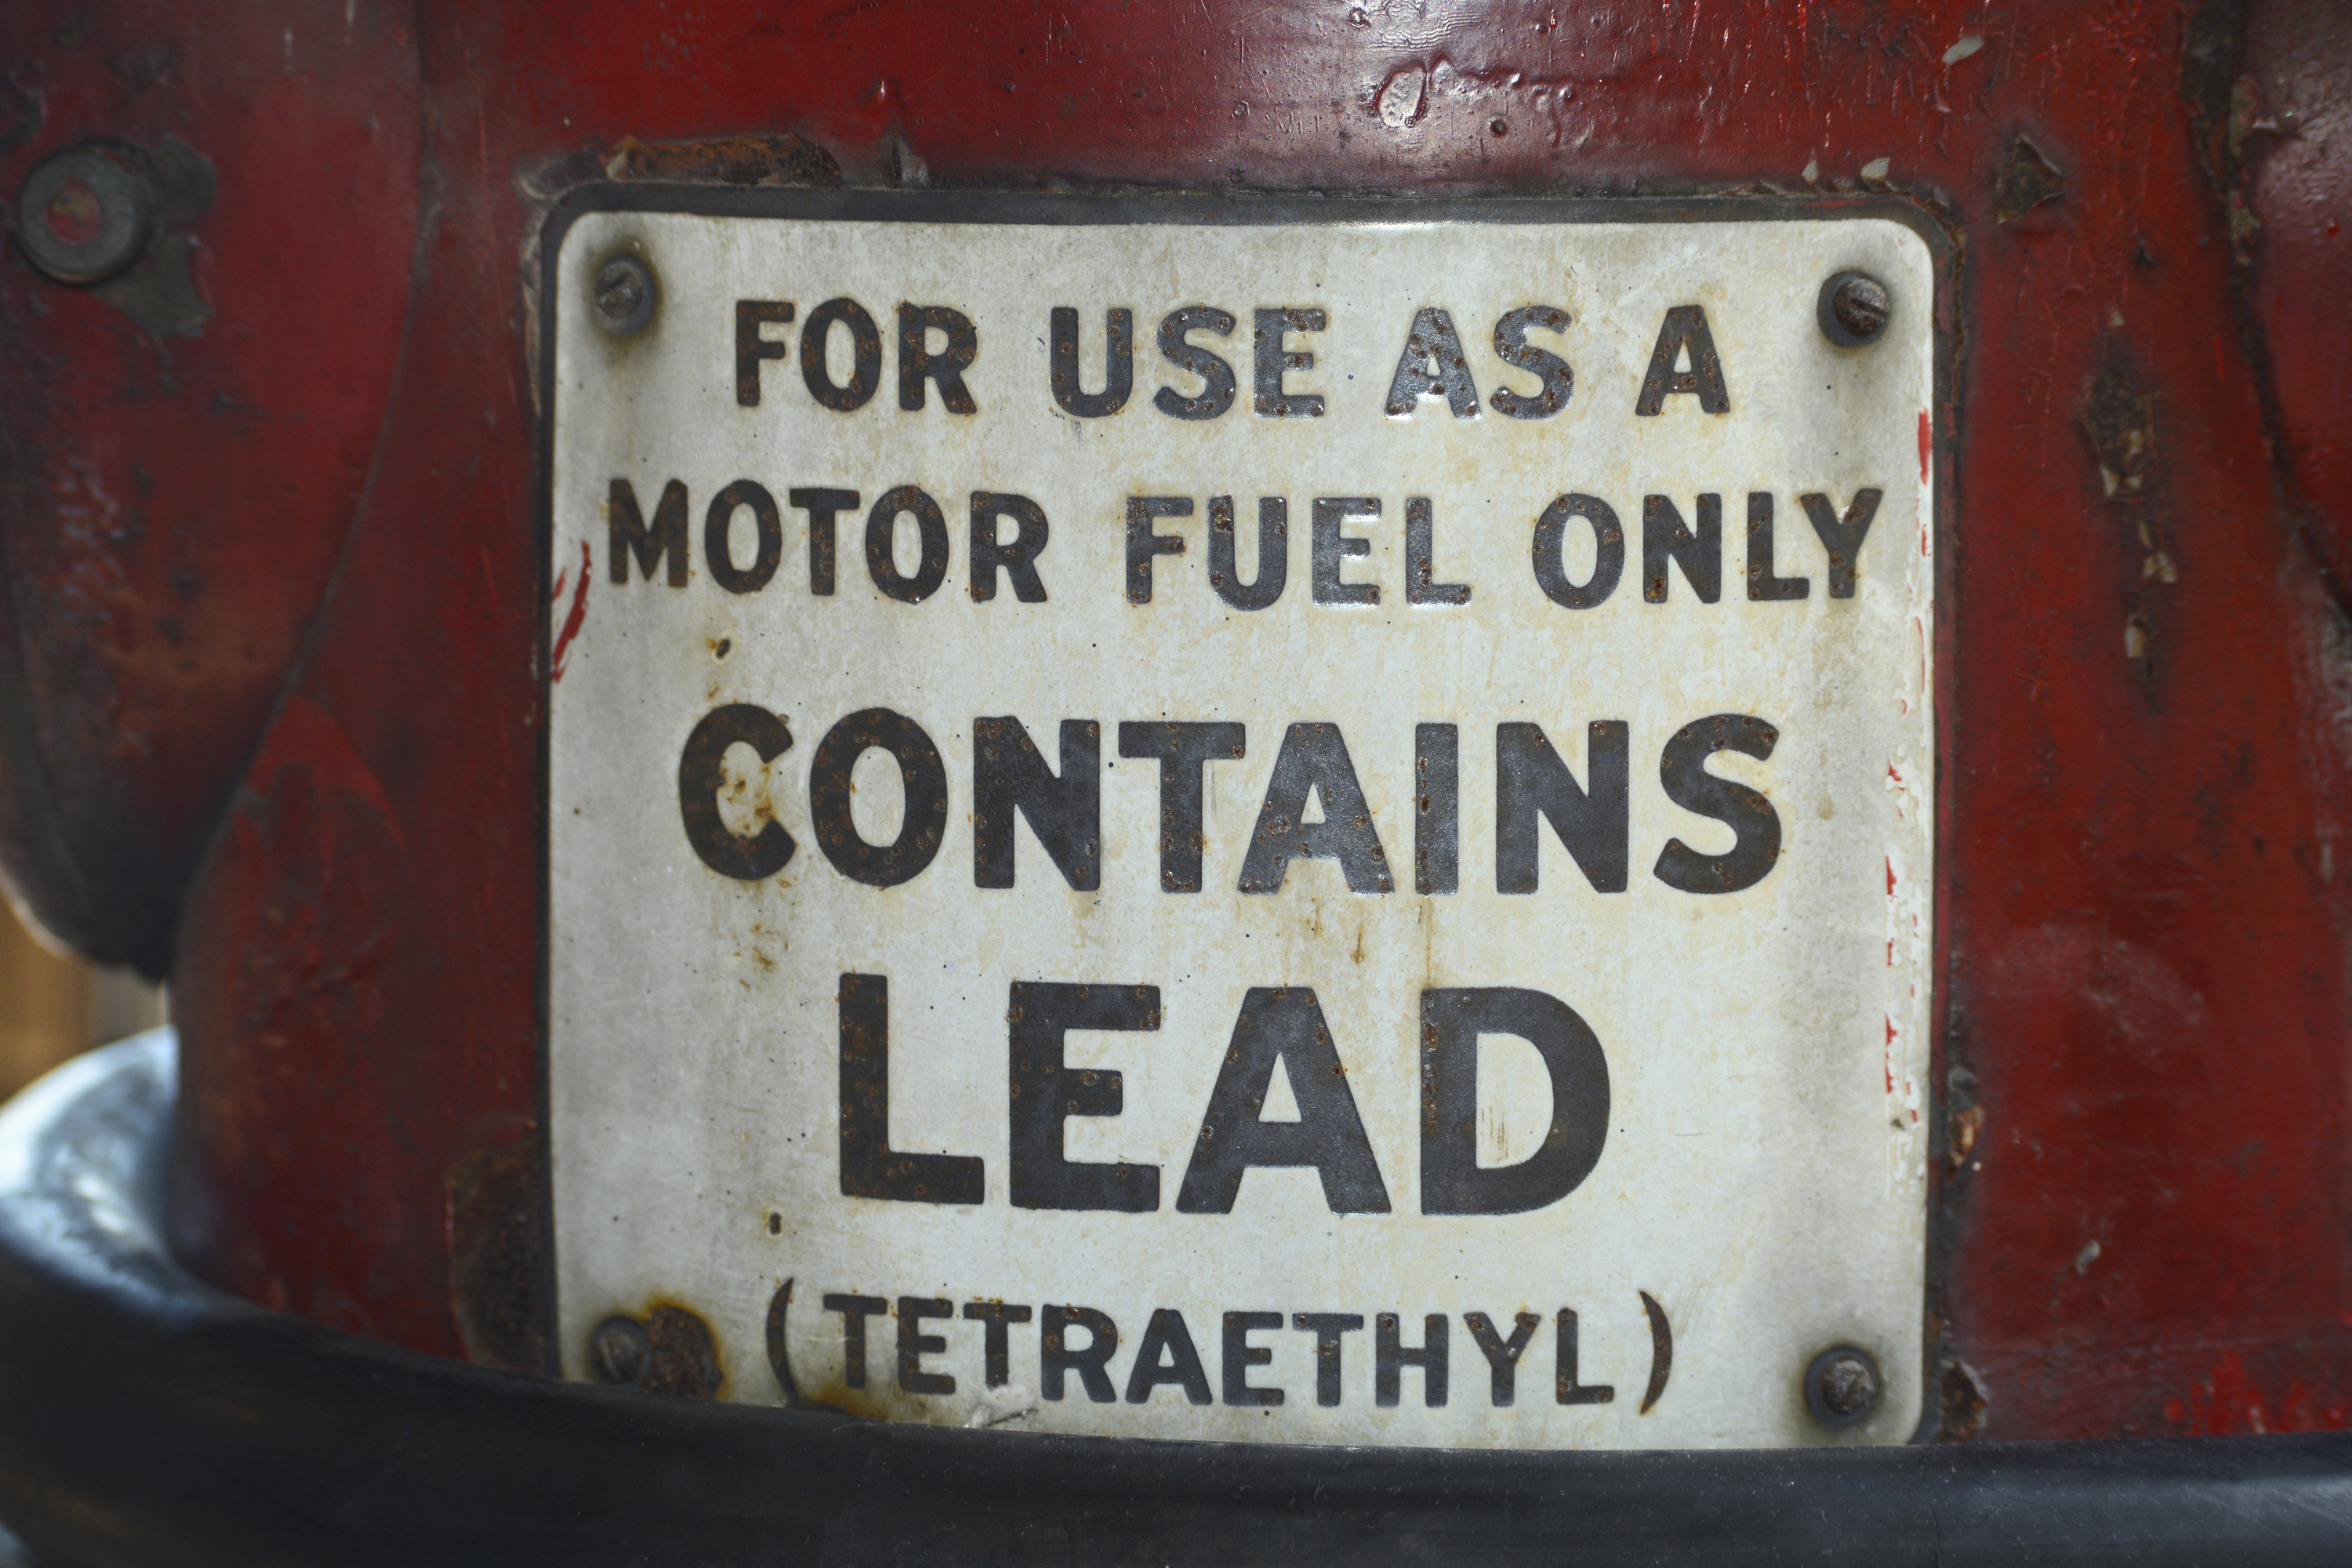 A sign on a vintage gasoline pump advises that the gas contains lead